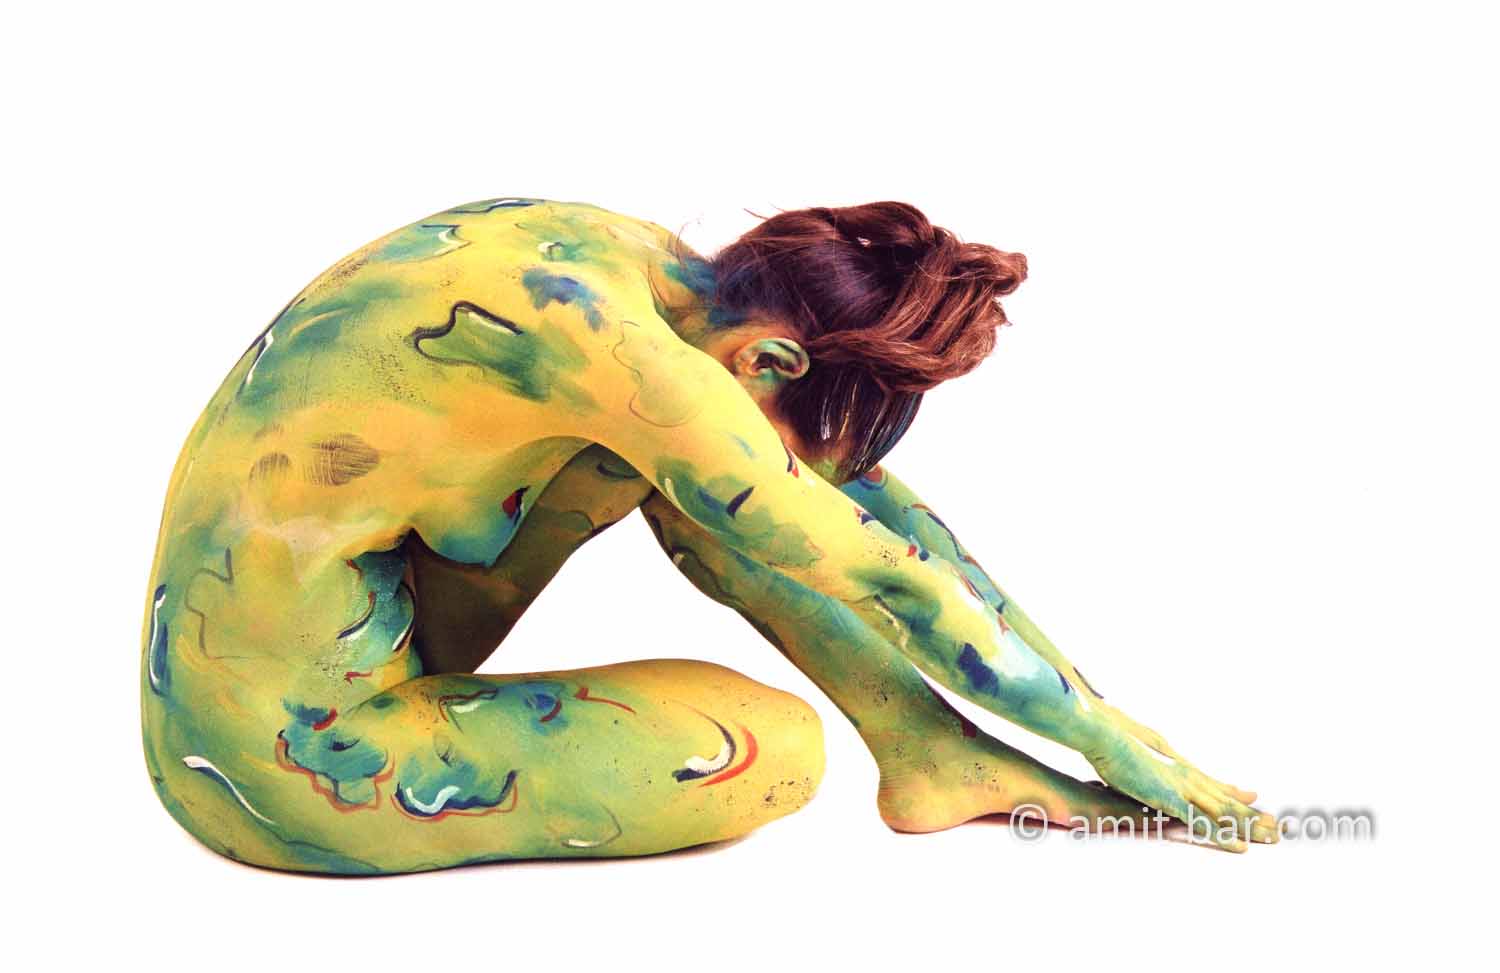 Green and yellow II: Body-painted model in green and yellow